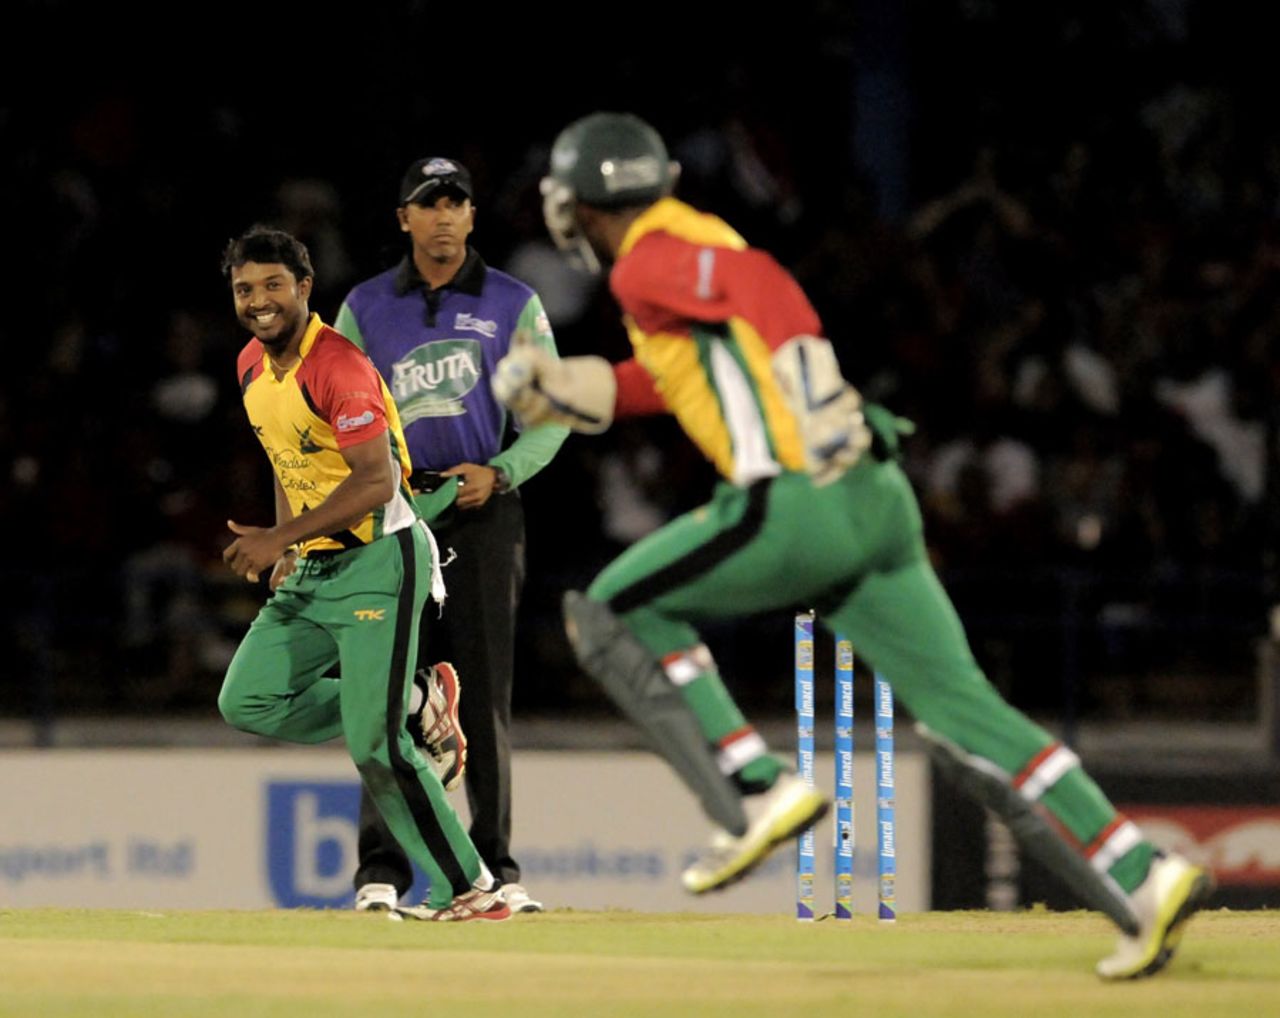 Left-arm spinner Veerasammy Permaul took two wickets for 20 runs, Trinidad & Tobago Red Steel v Guyana Amazon Warriors, Caribbean Premier League 2013, 1st semi-final, Port-of-Spain, August 22, 2013